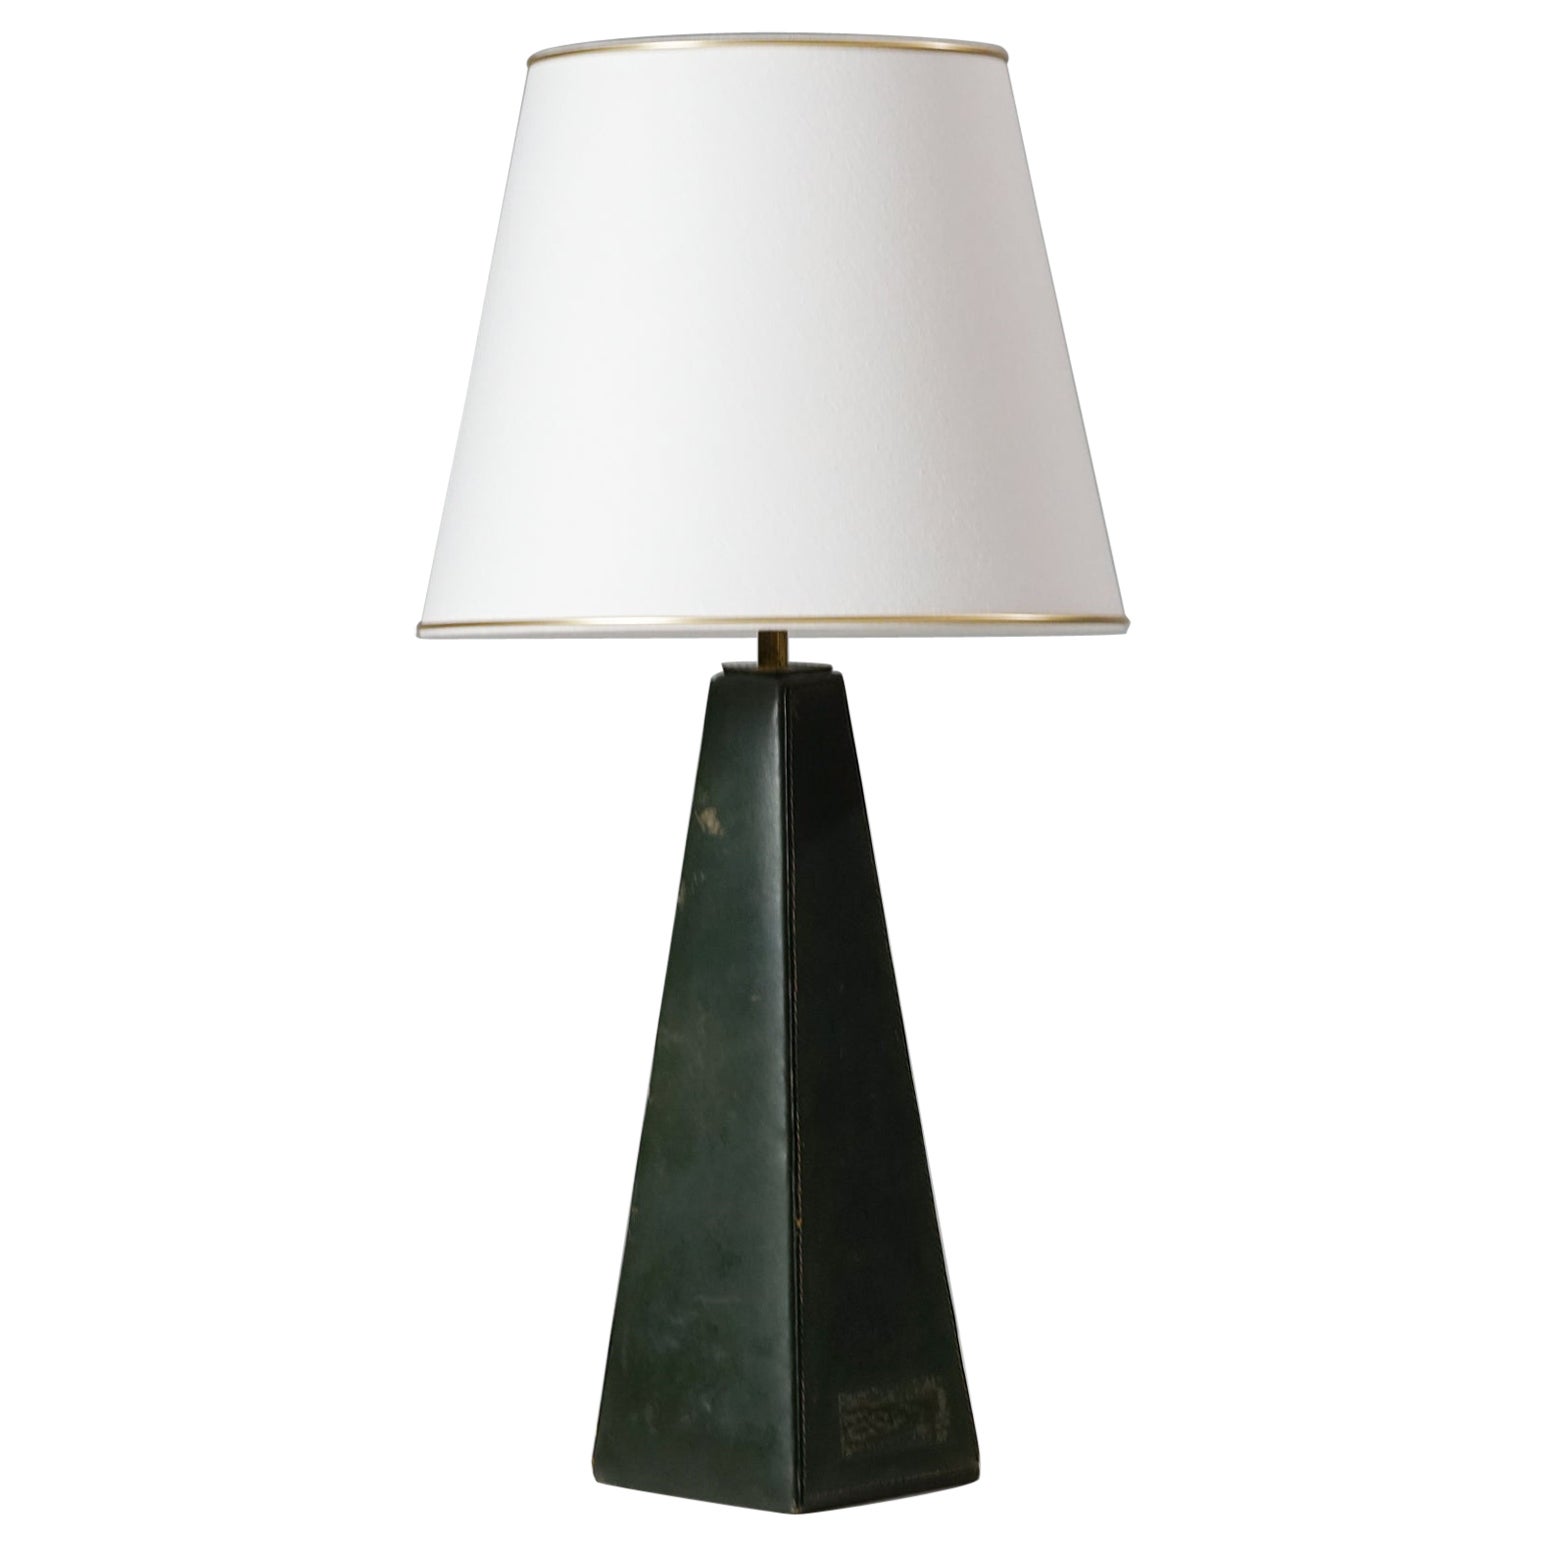 Lisa Johansson-Pape Rare Leather Table Lamp, Orno Oy, 1960s For Sale